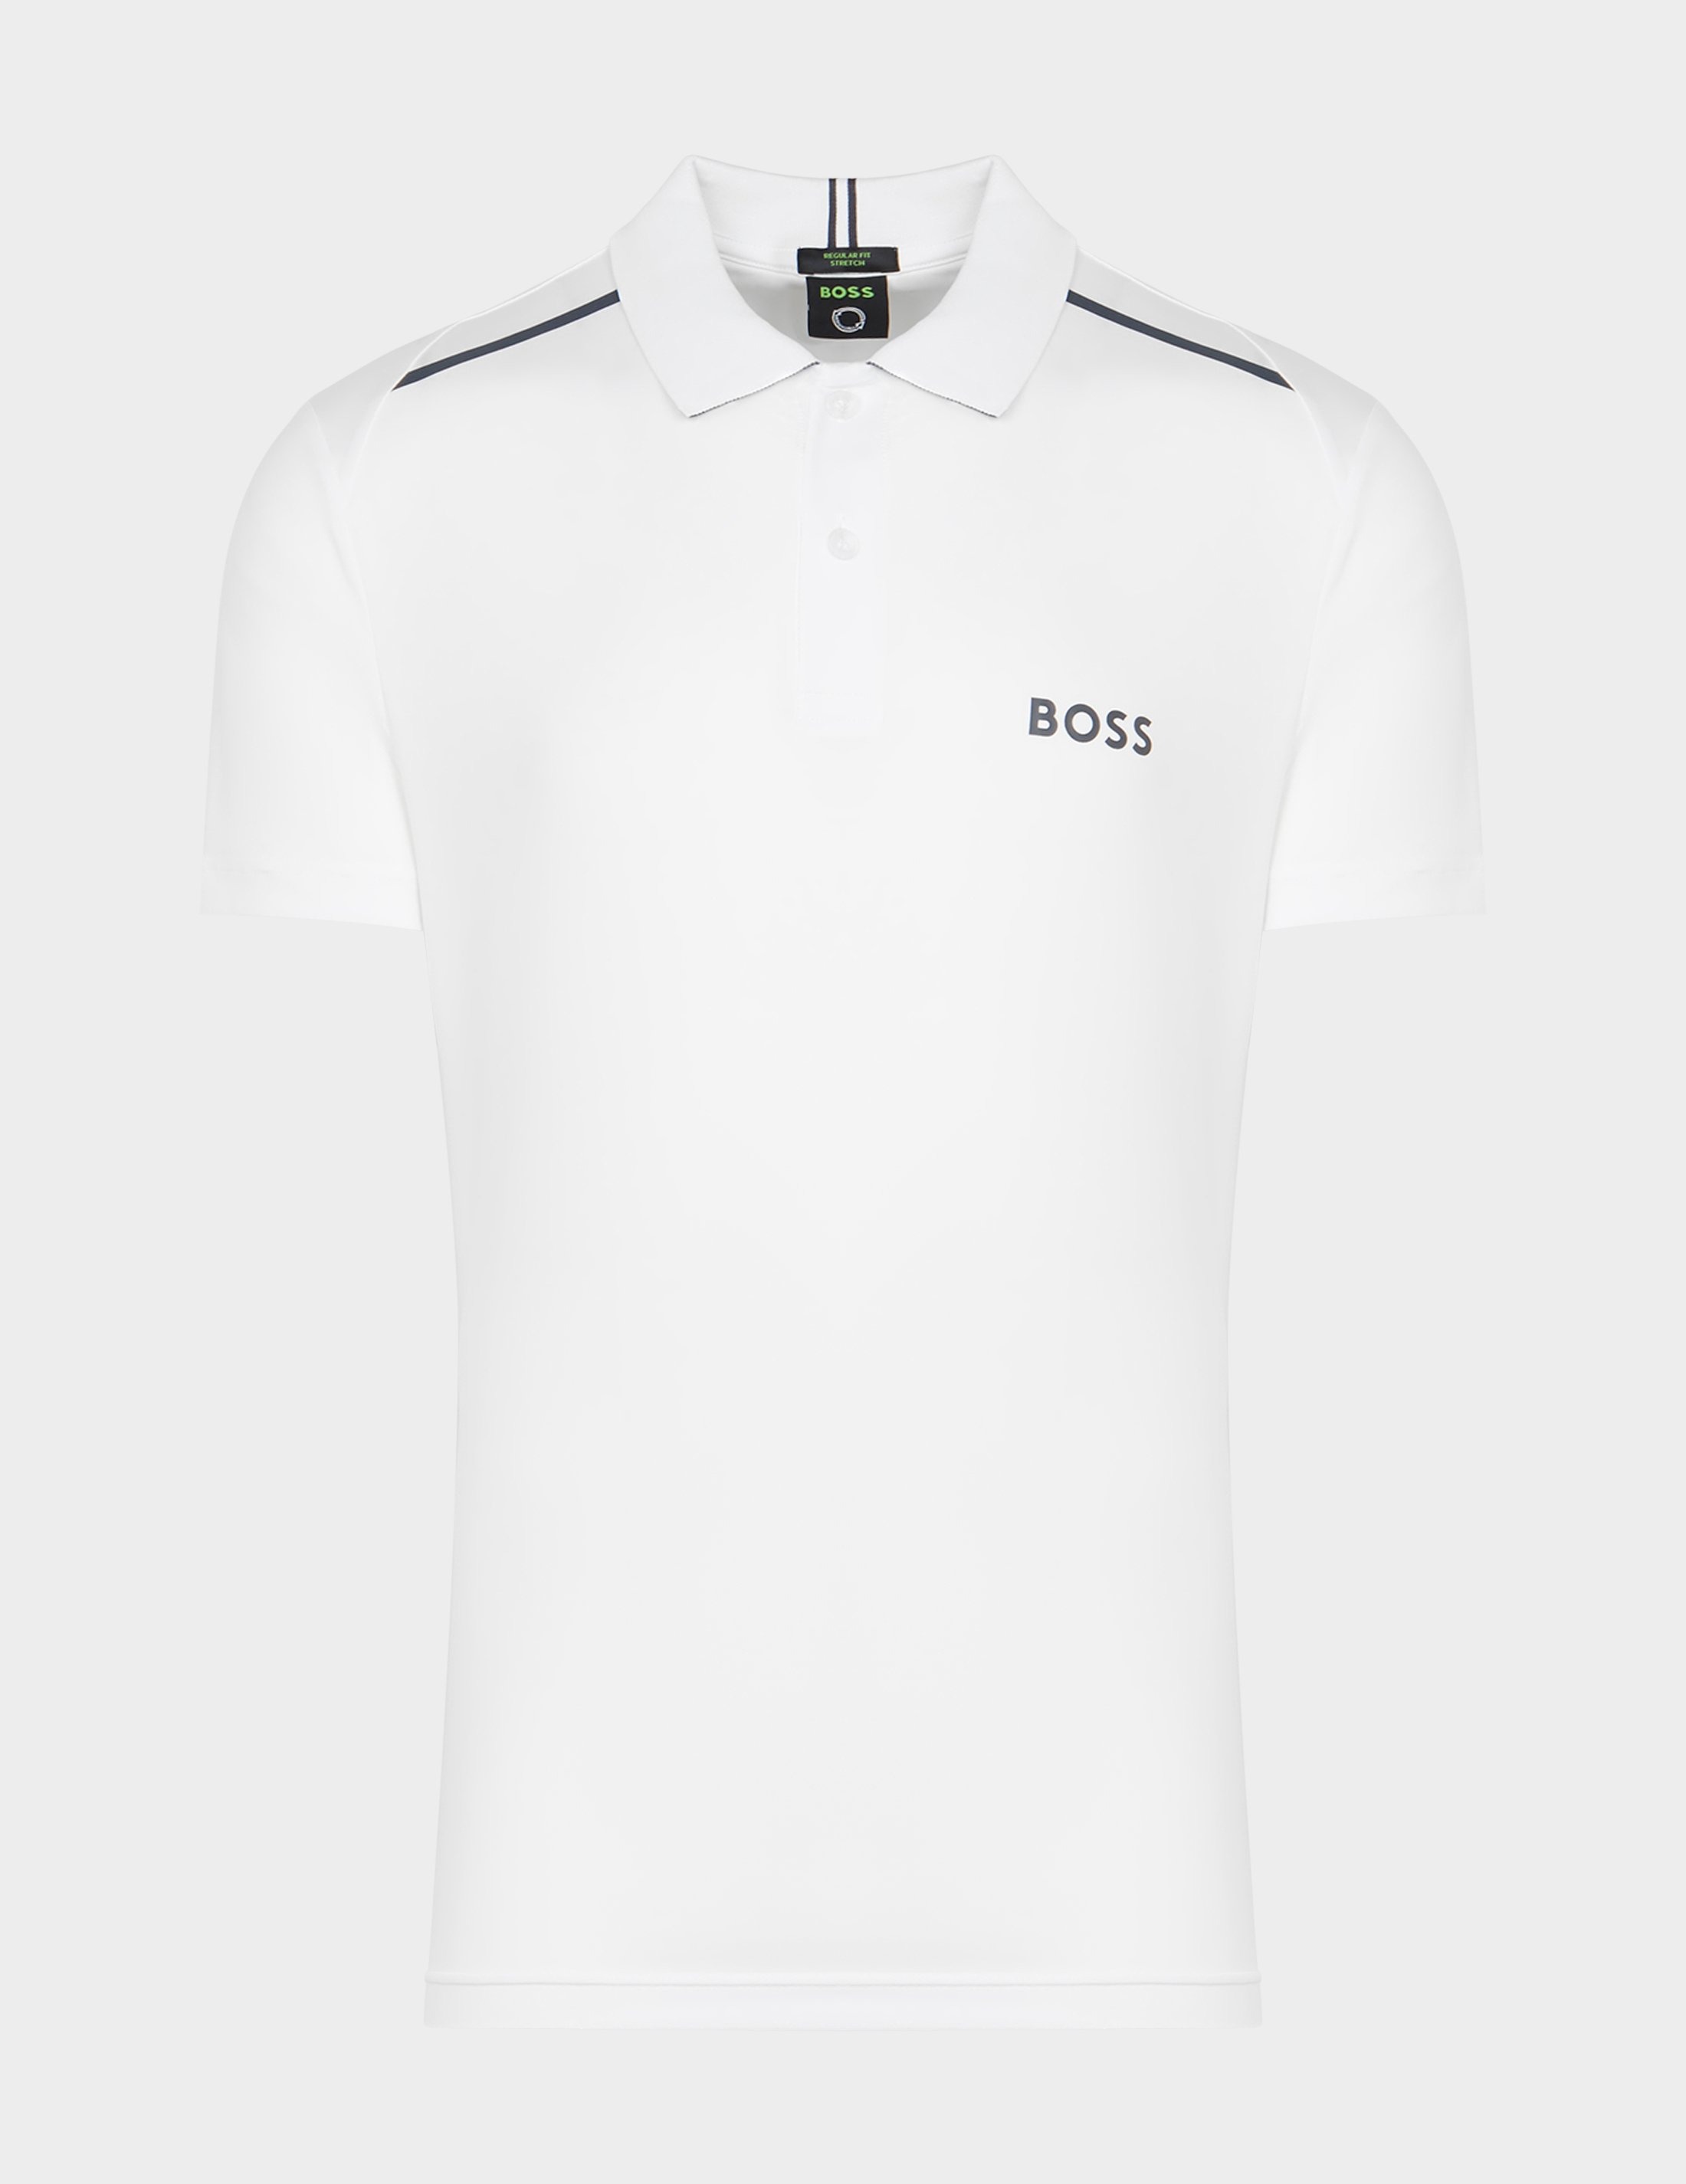 HUGO BOSS 'Patry-2' Regular Fit Tipped Collar Polo Shirts NEW NWT 